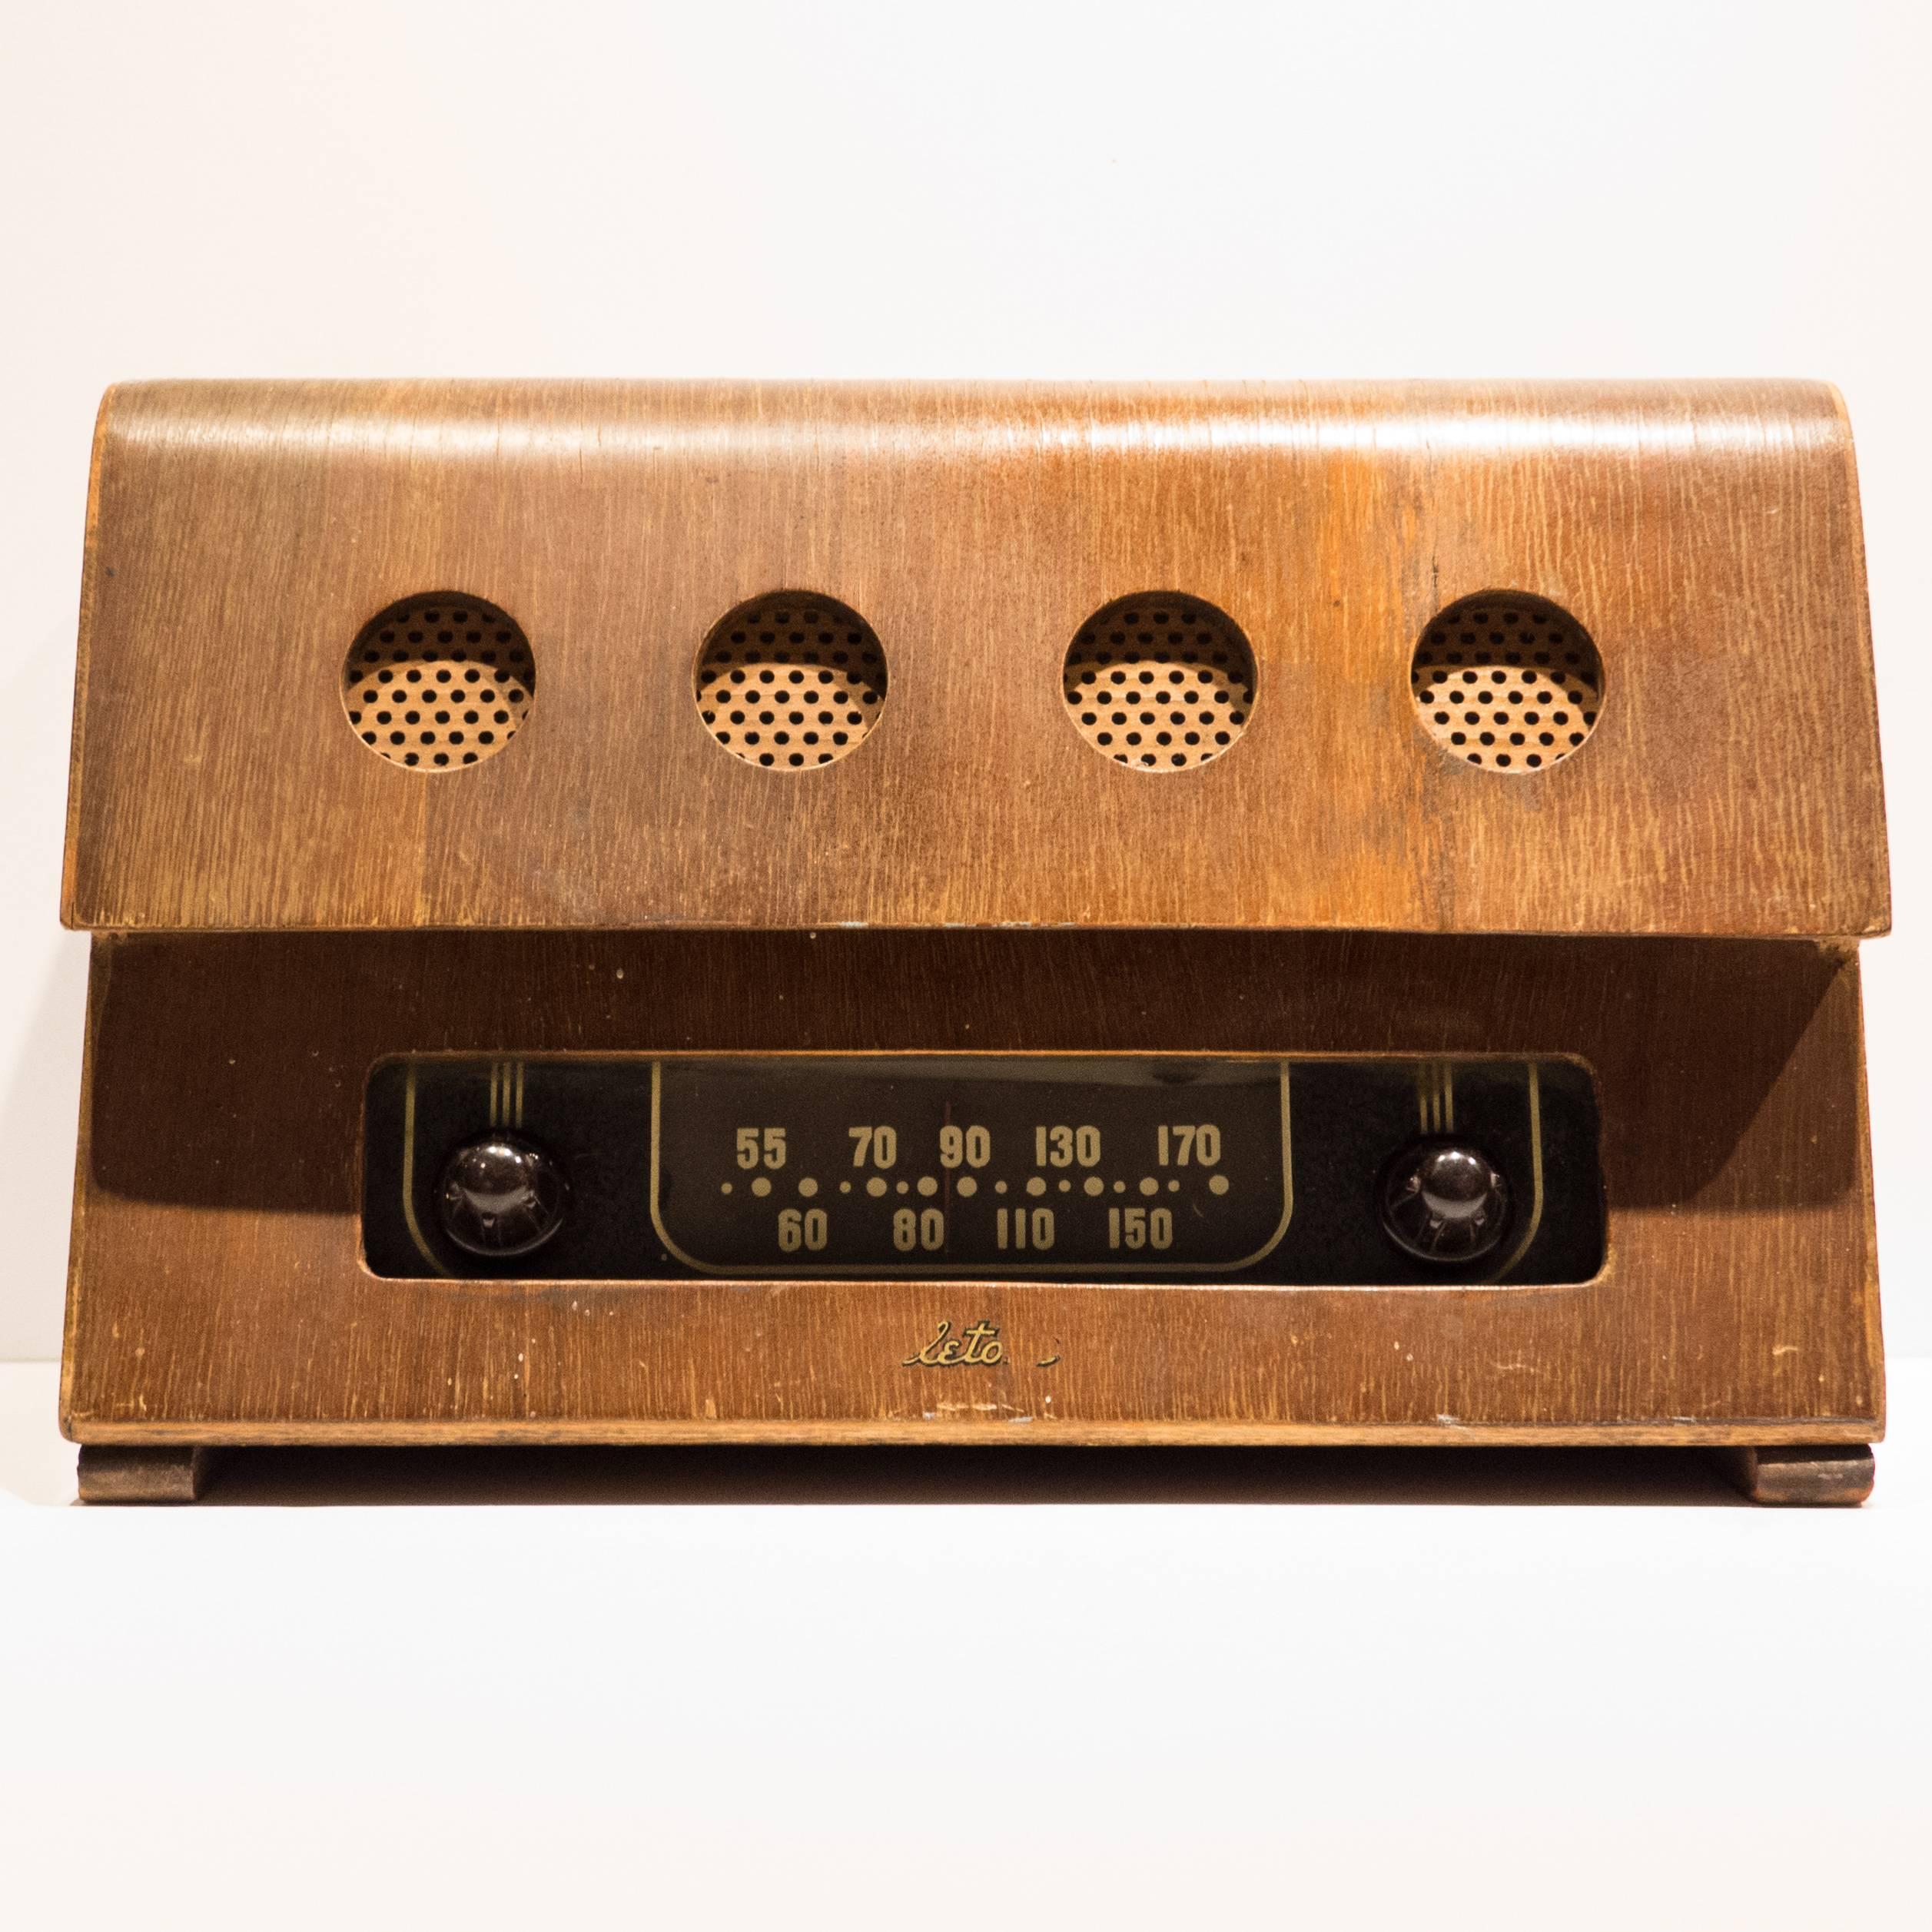 Radio of molded and cut walnut plywood, bakelite, glass and perforated masonite. Designed by Charles and Ray Eames and produced by Evans Products for Teletone, circa 1946. As Richard Wright noted in 2004, 